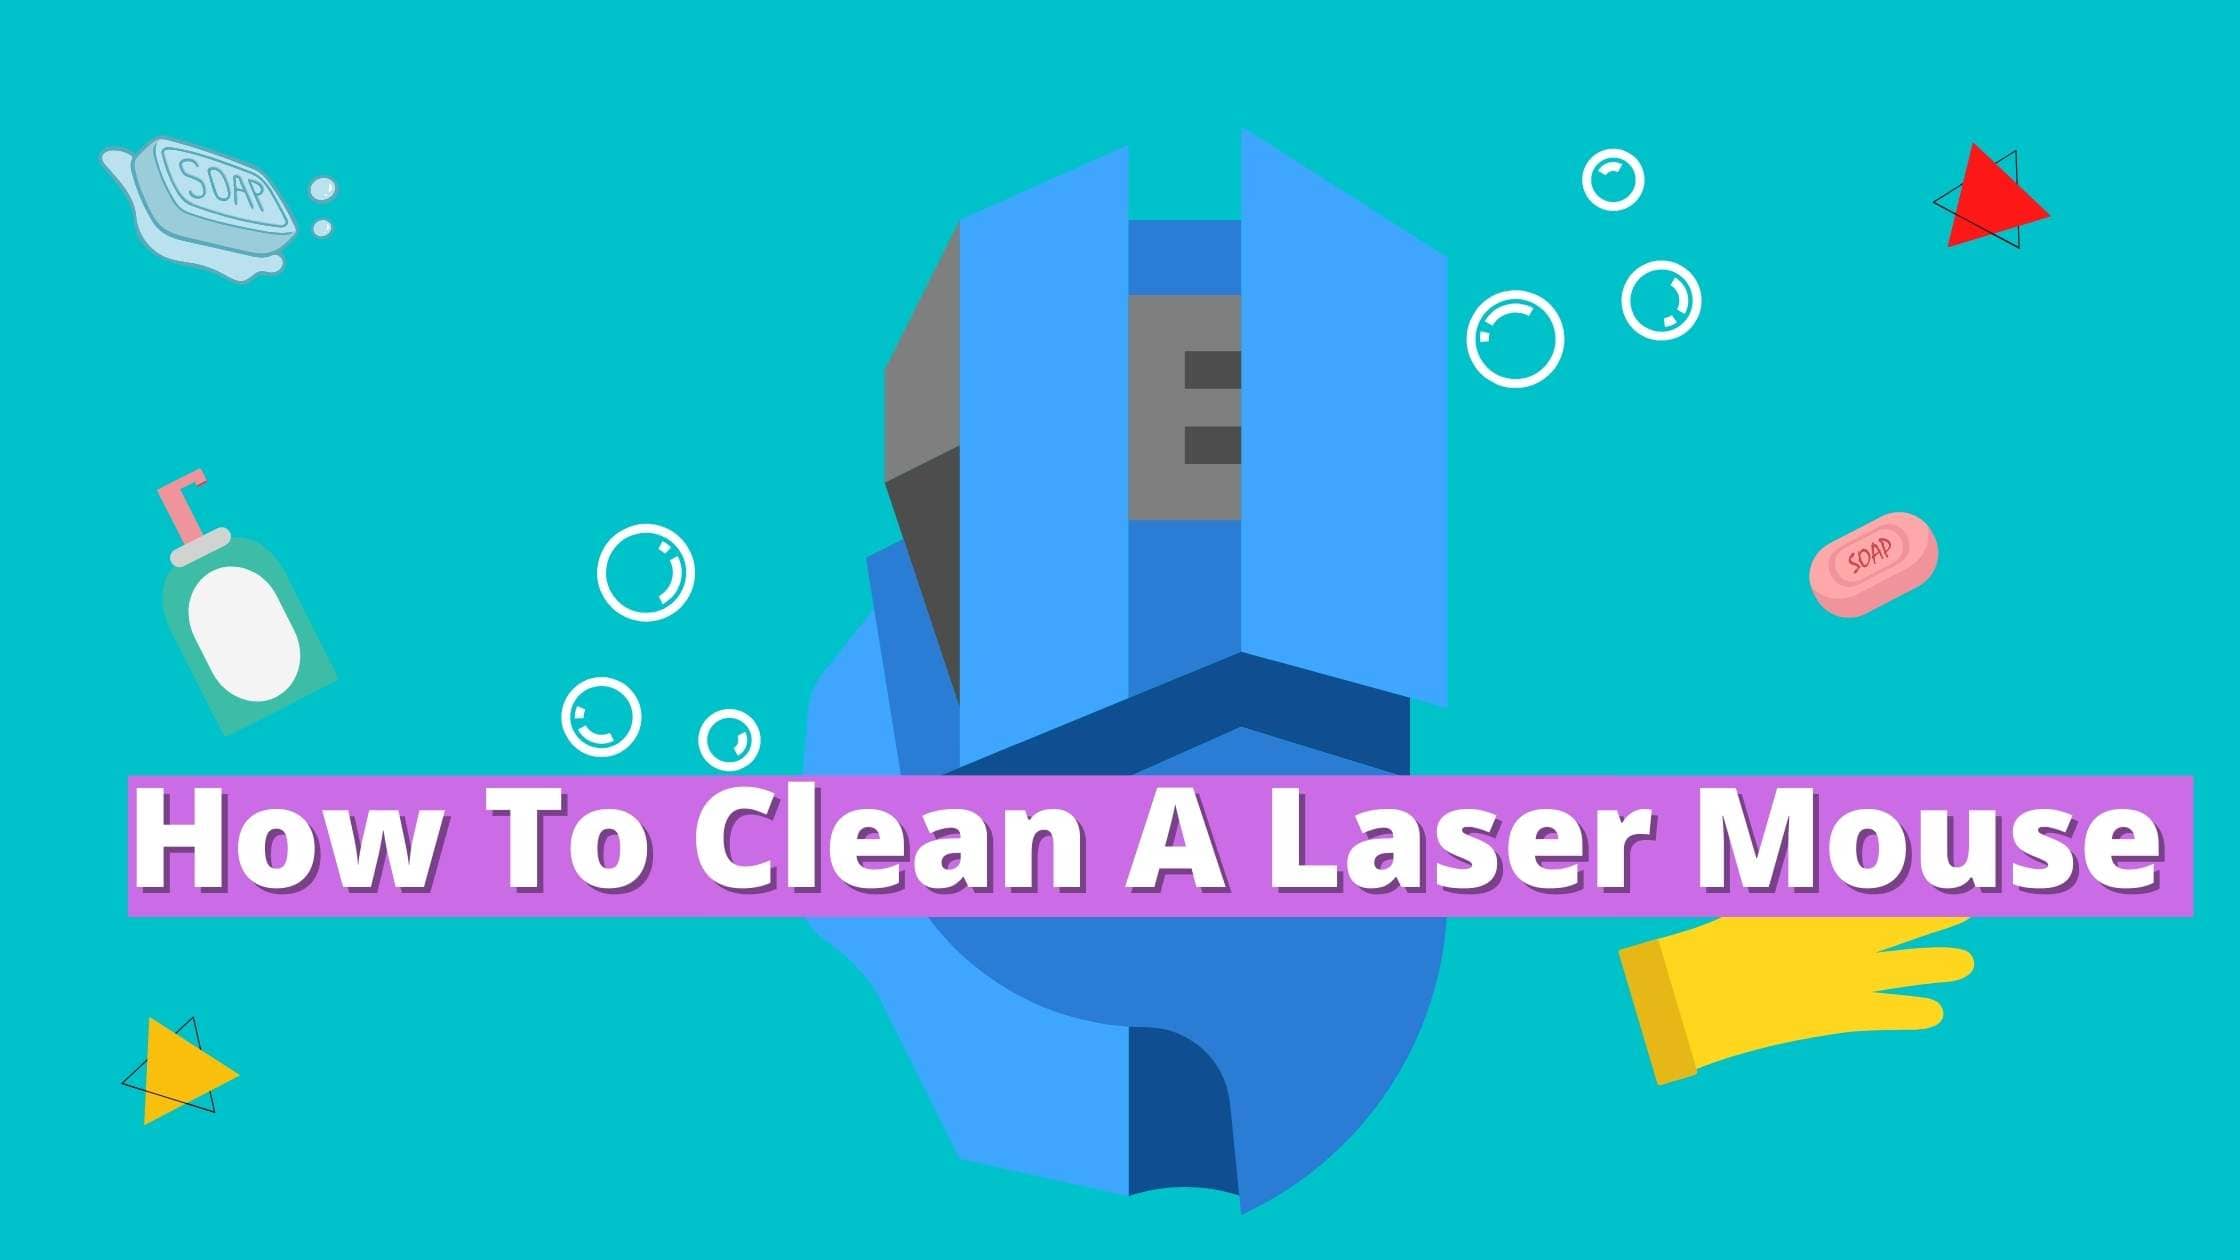 How to Clean a Laser Mouse